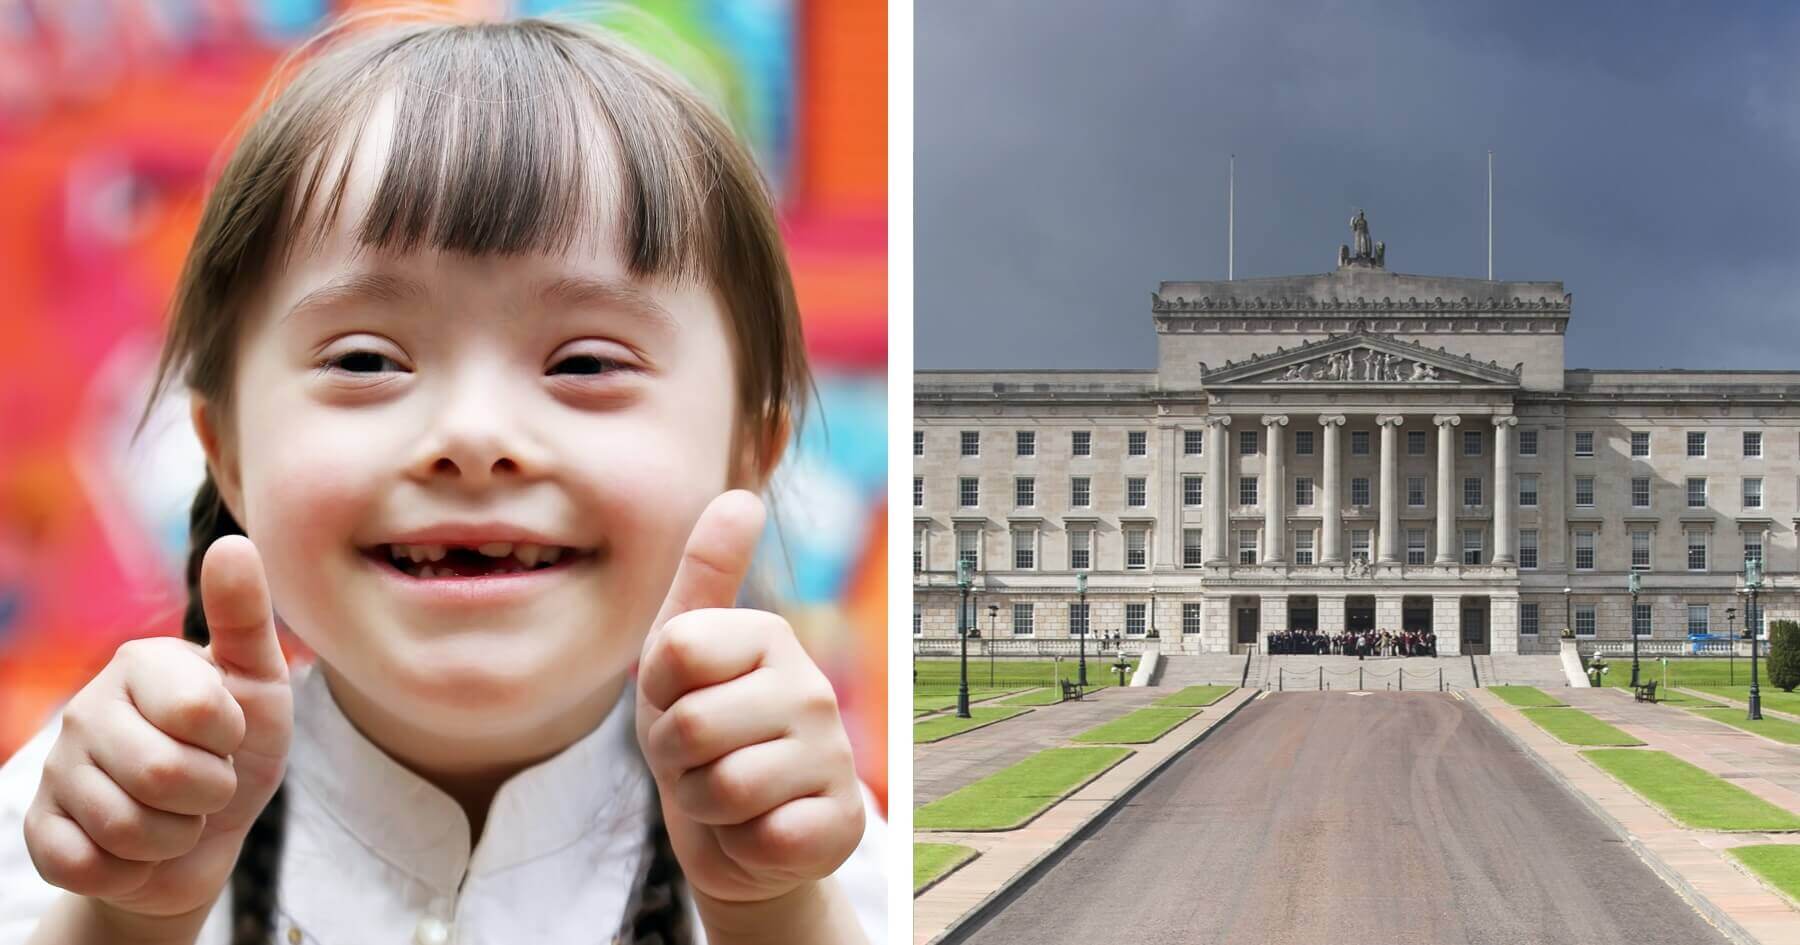 Disability abortion bill passes next stage, 99% of submissions support law change